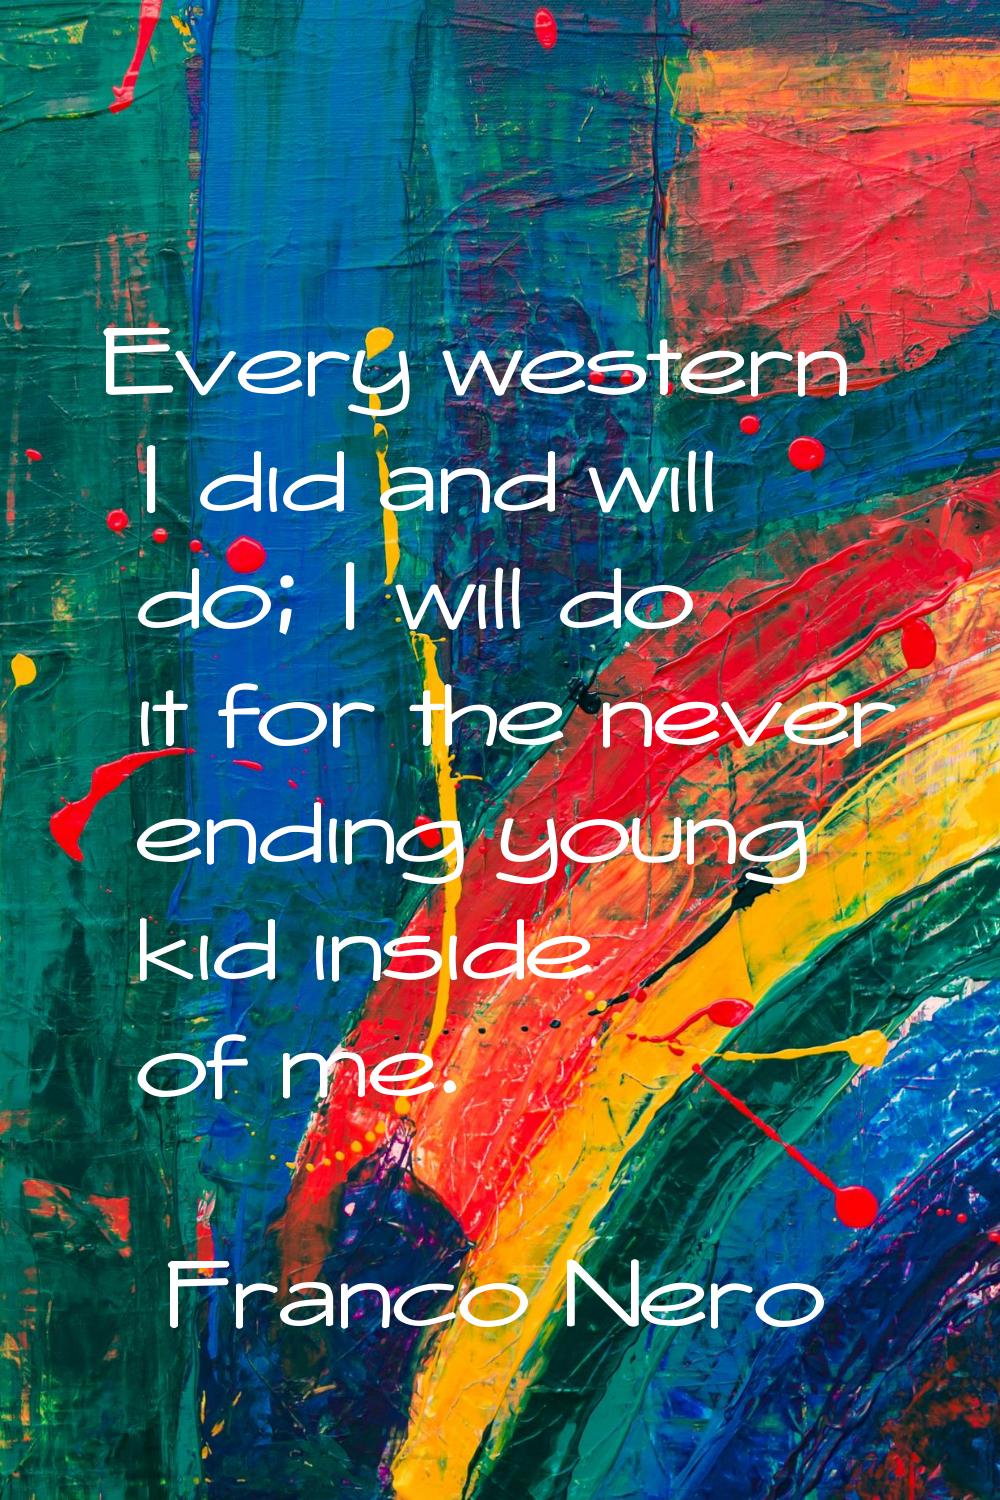 Every western I did and will do; I will do it for the never ending young kid inside of me.